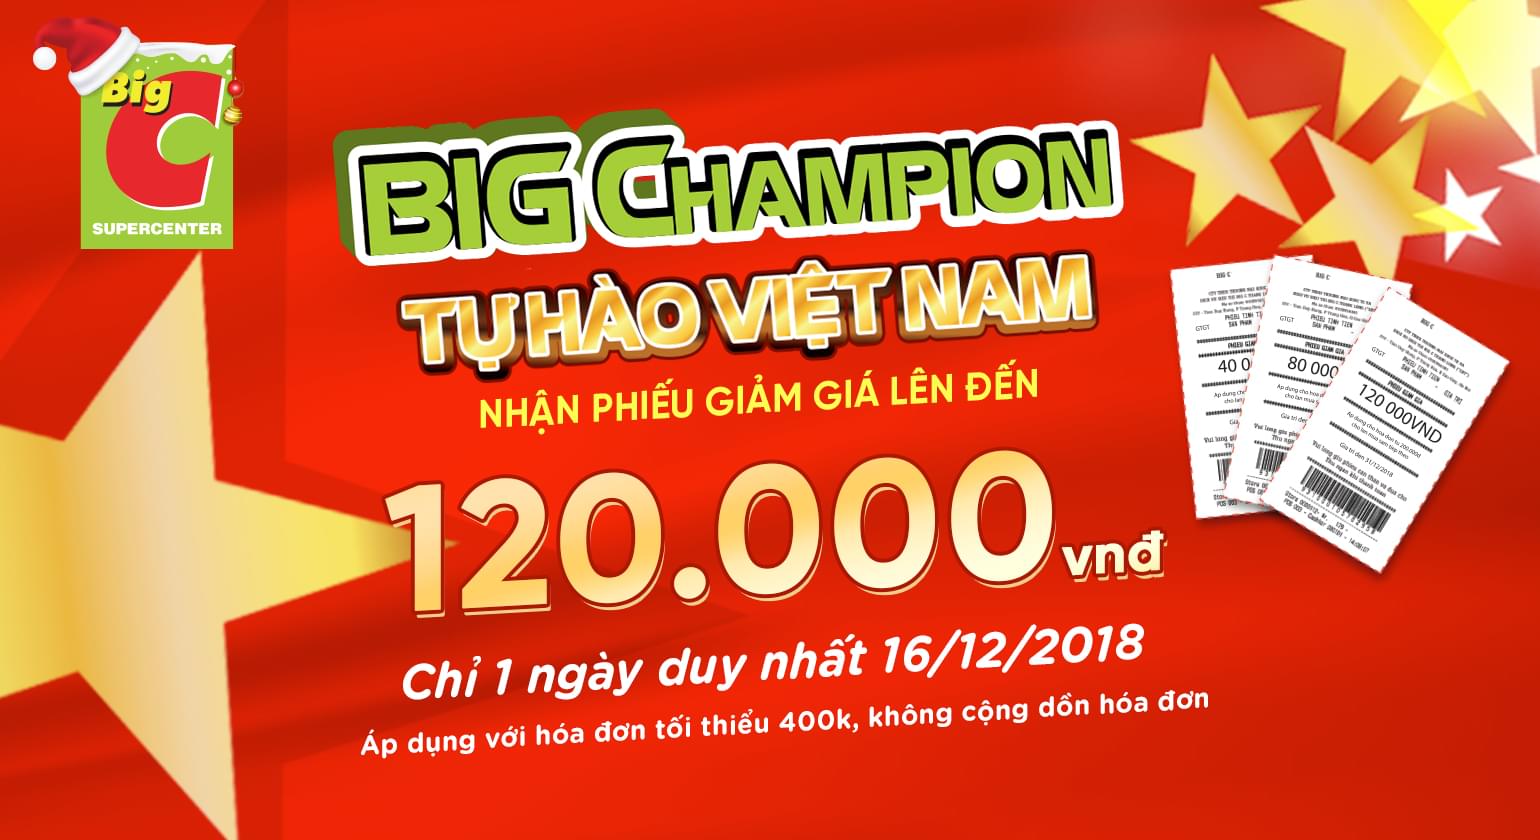 Big C’s special promotion to honor Vietnam team at AFF Cup 